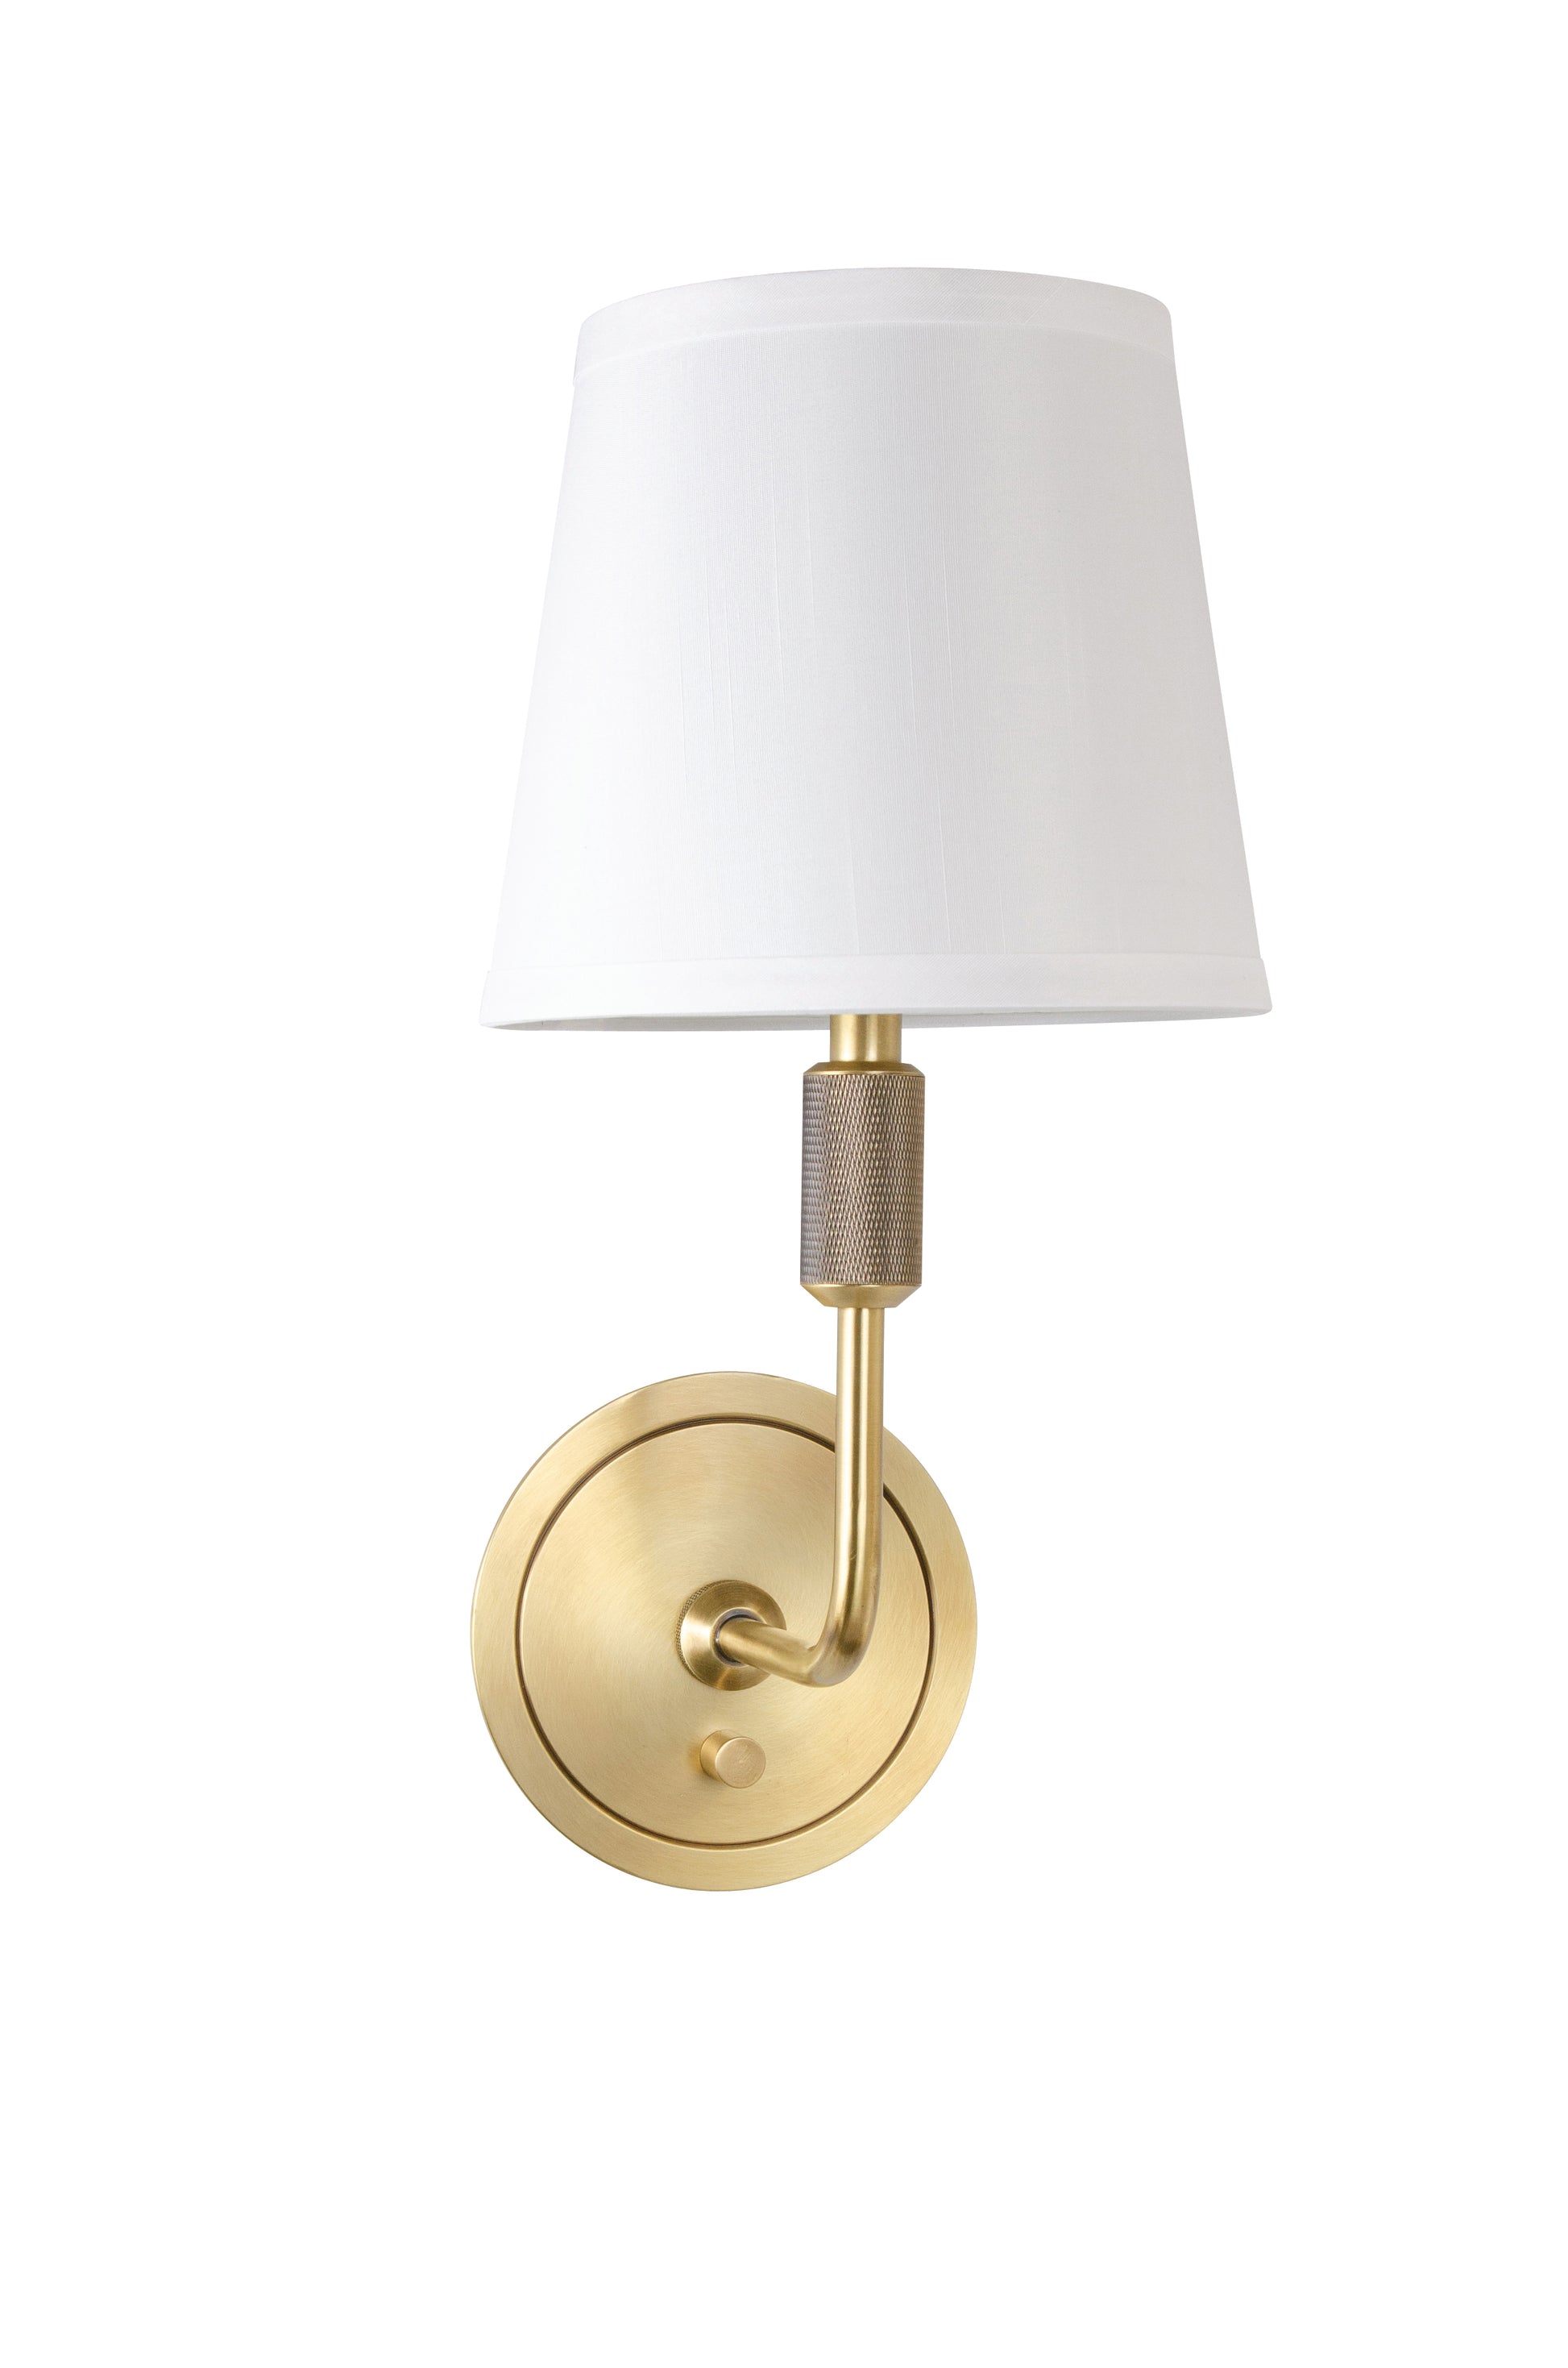 House of Troy Killington Brushed Brass direct wire wall lamp with full range dimmer KL325-BB